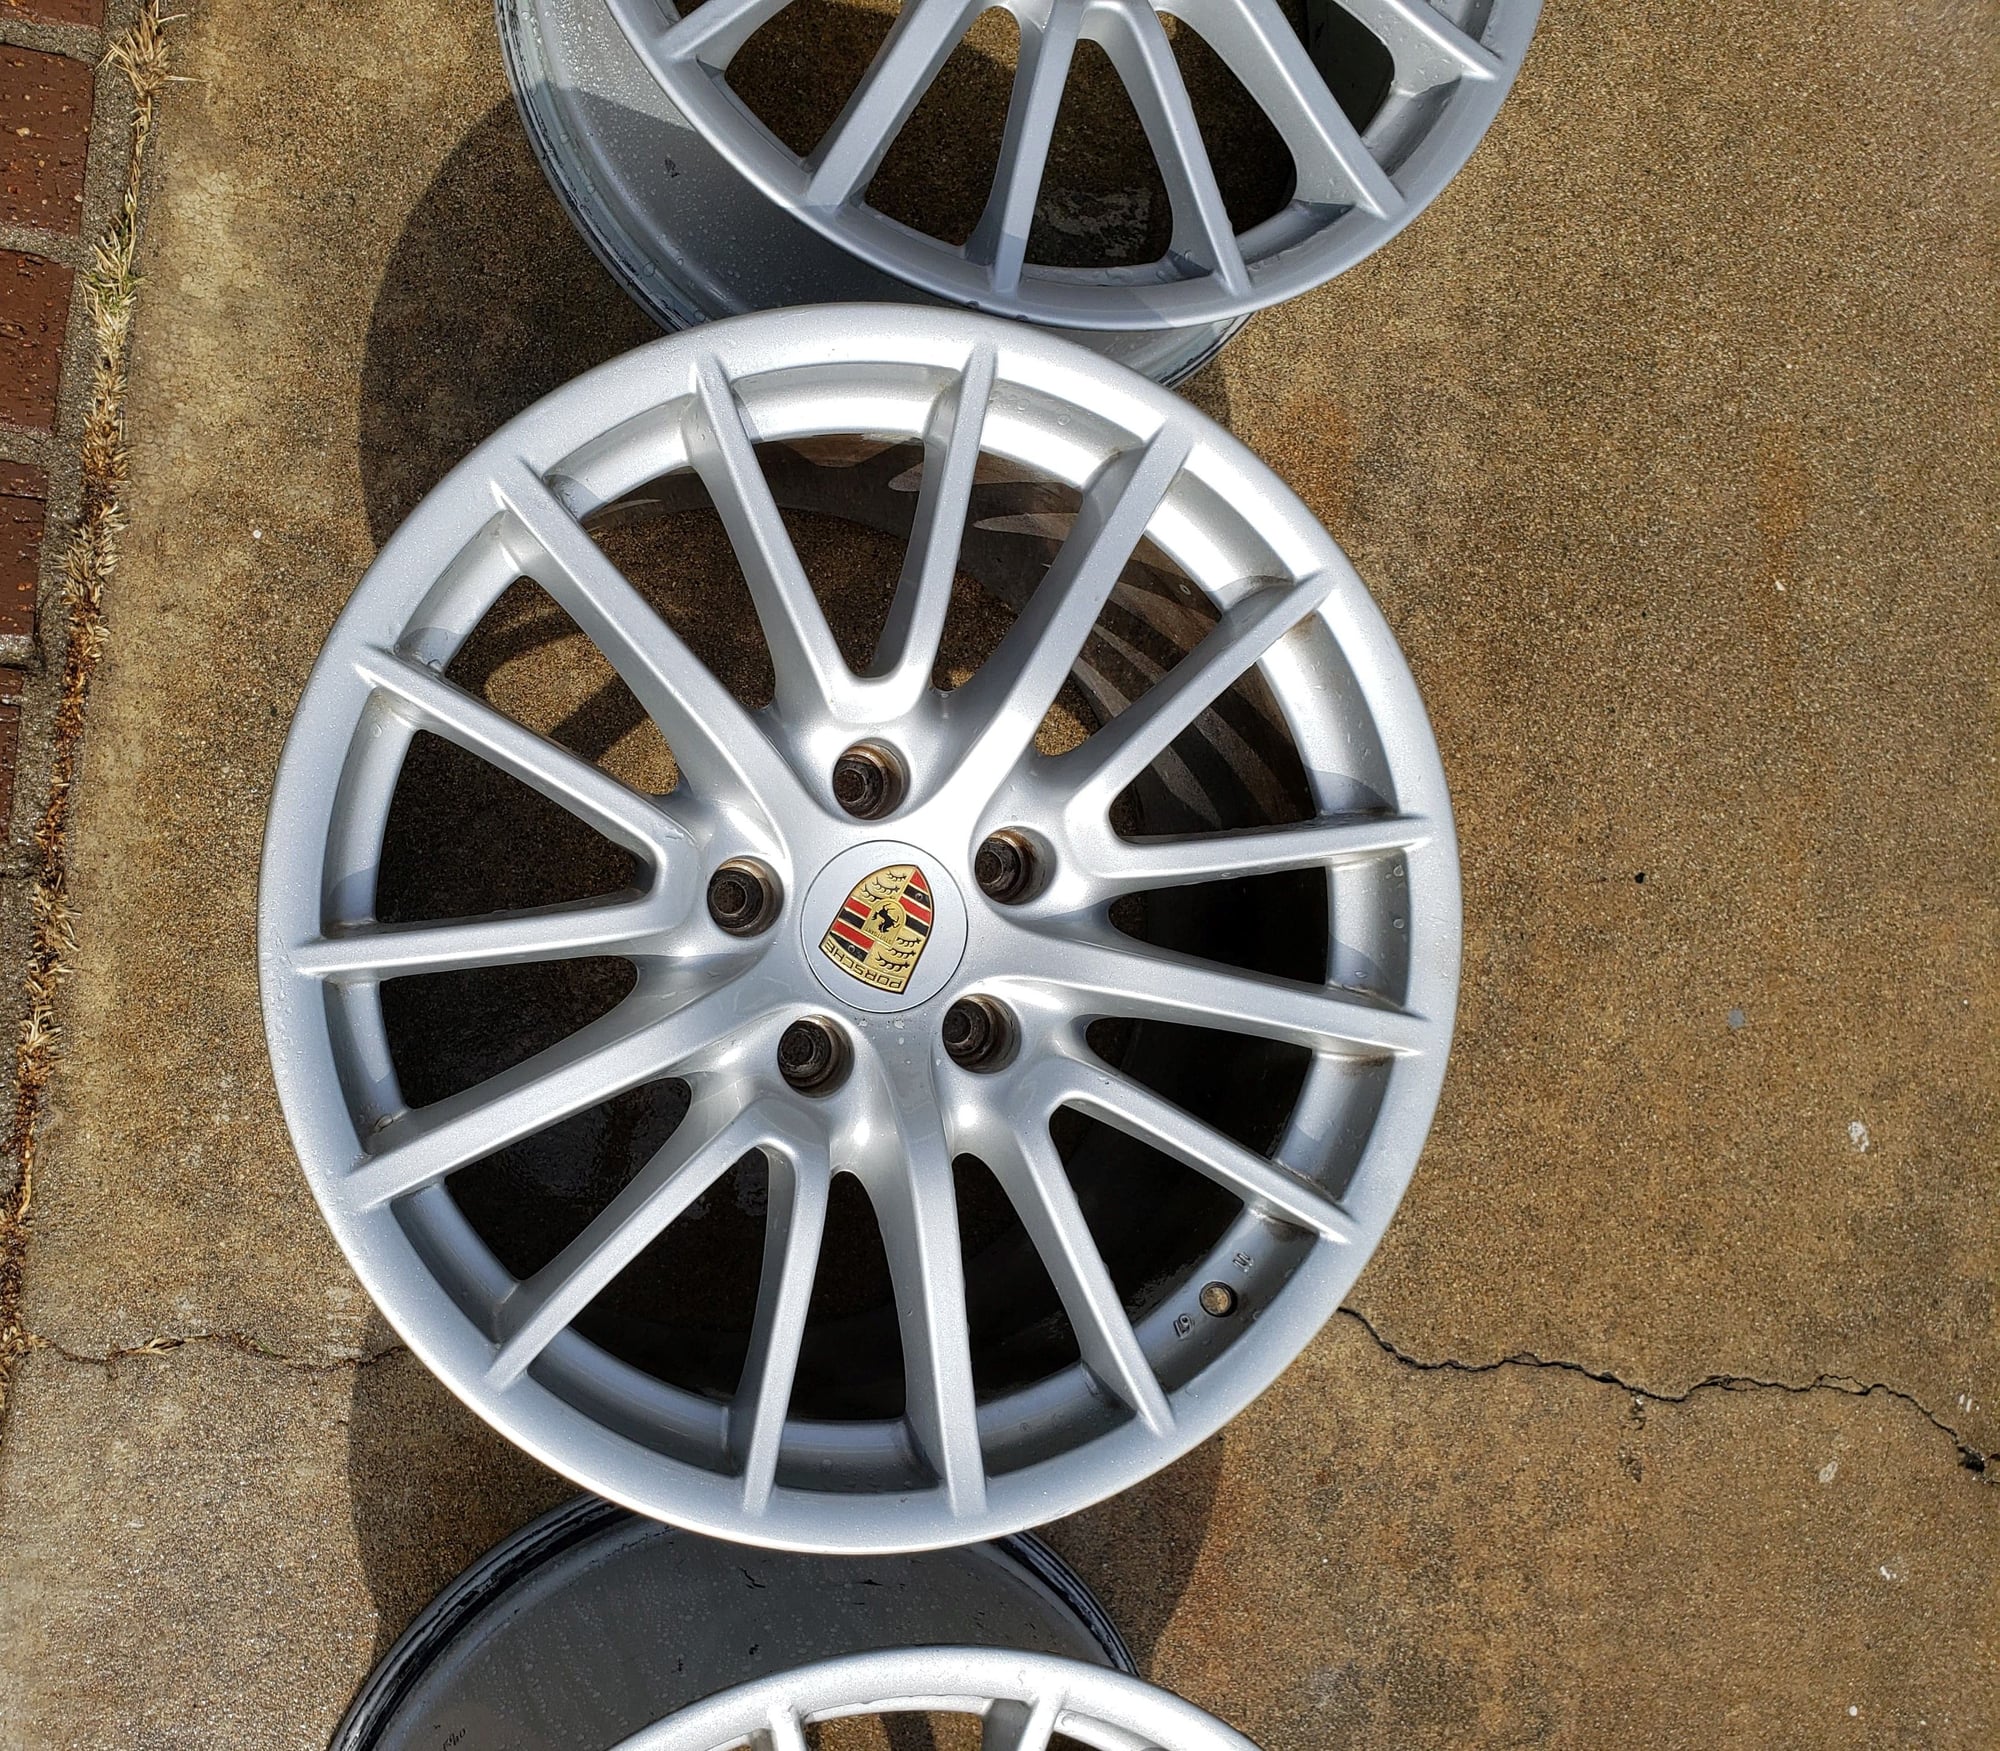 Wheels and Tires/Axles - 997S Sport Design Wheels - Used - Charlotte, NC 28277, United States